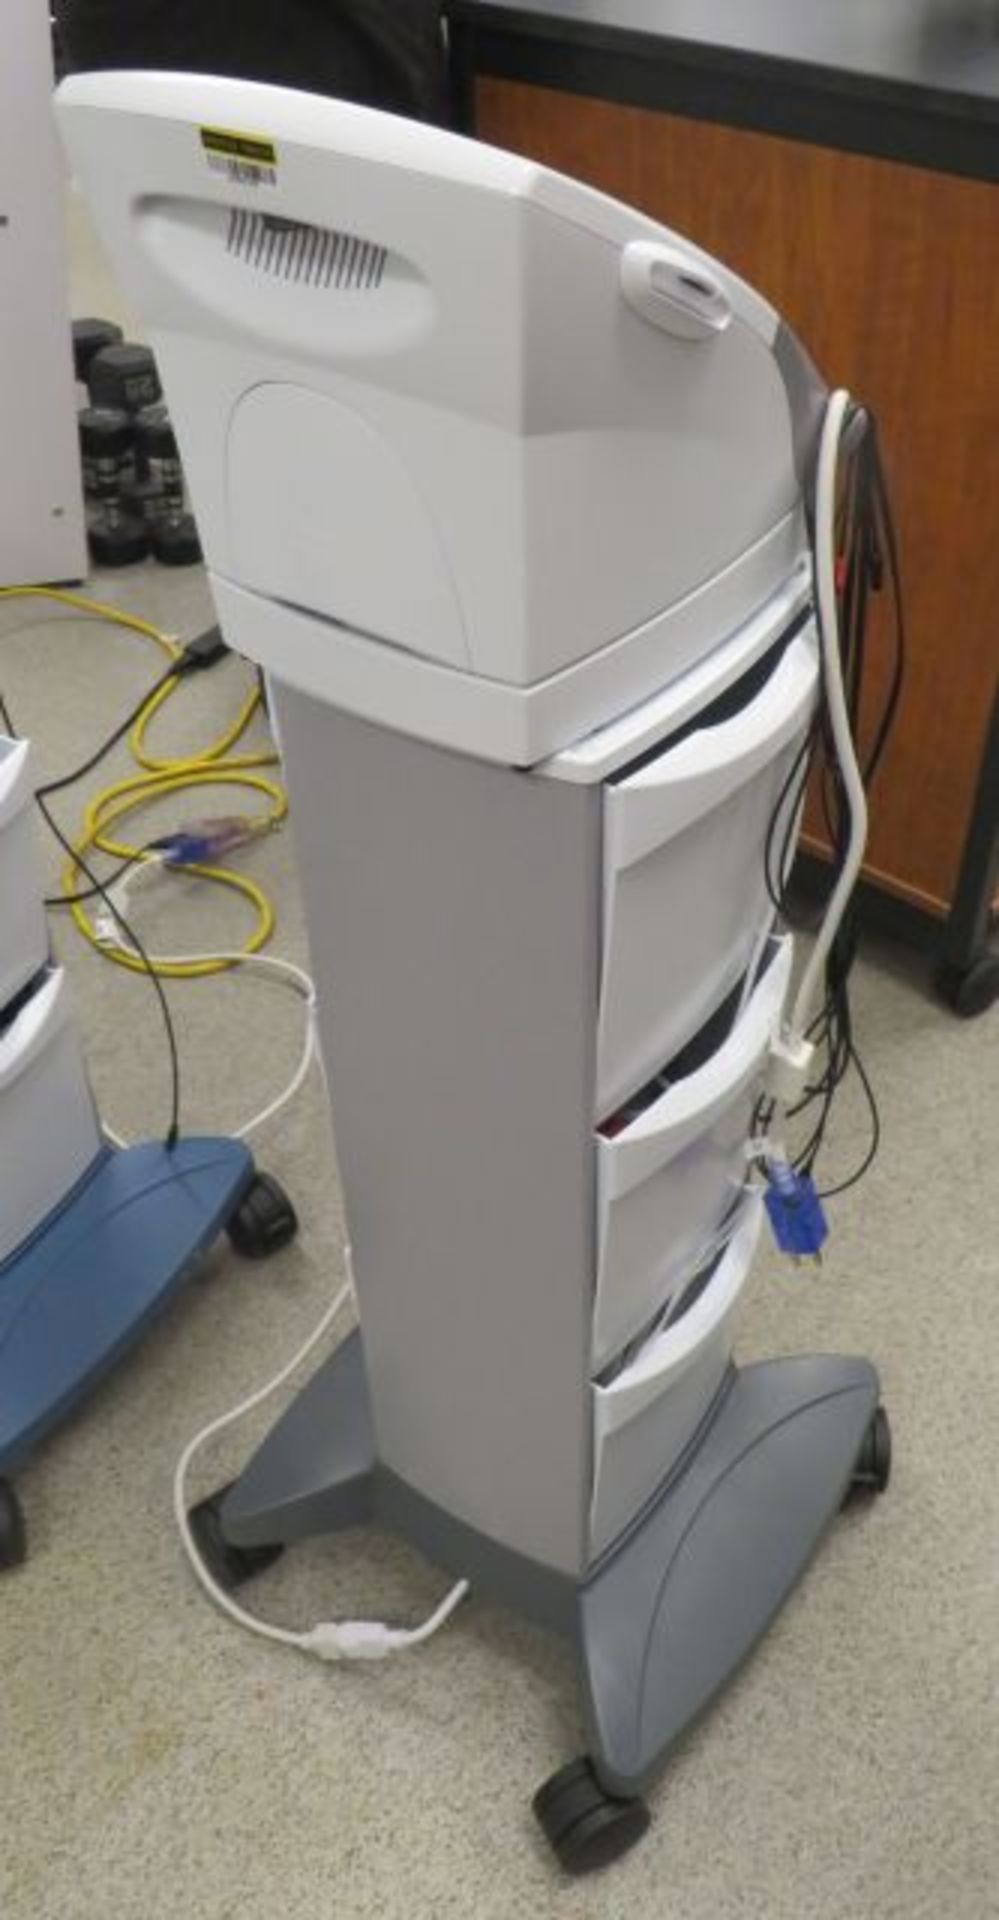 Chattanooga Group Intelect Legend XT Electrotherapy/Ultrasound System, - Image 3 of 3